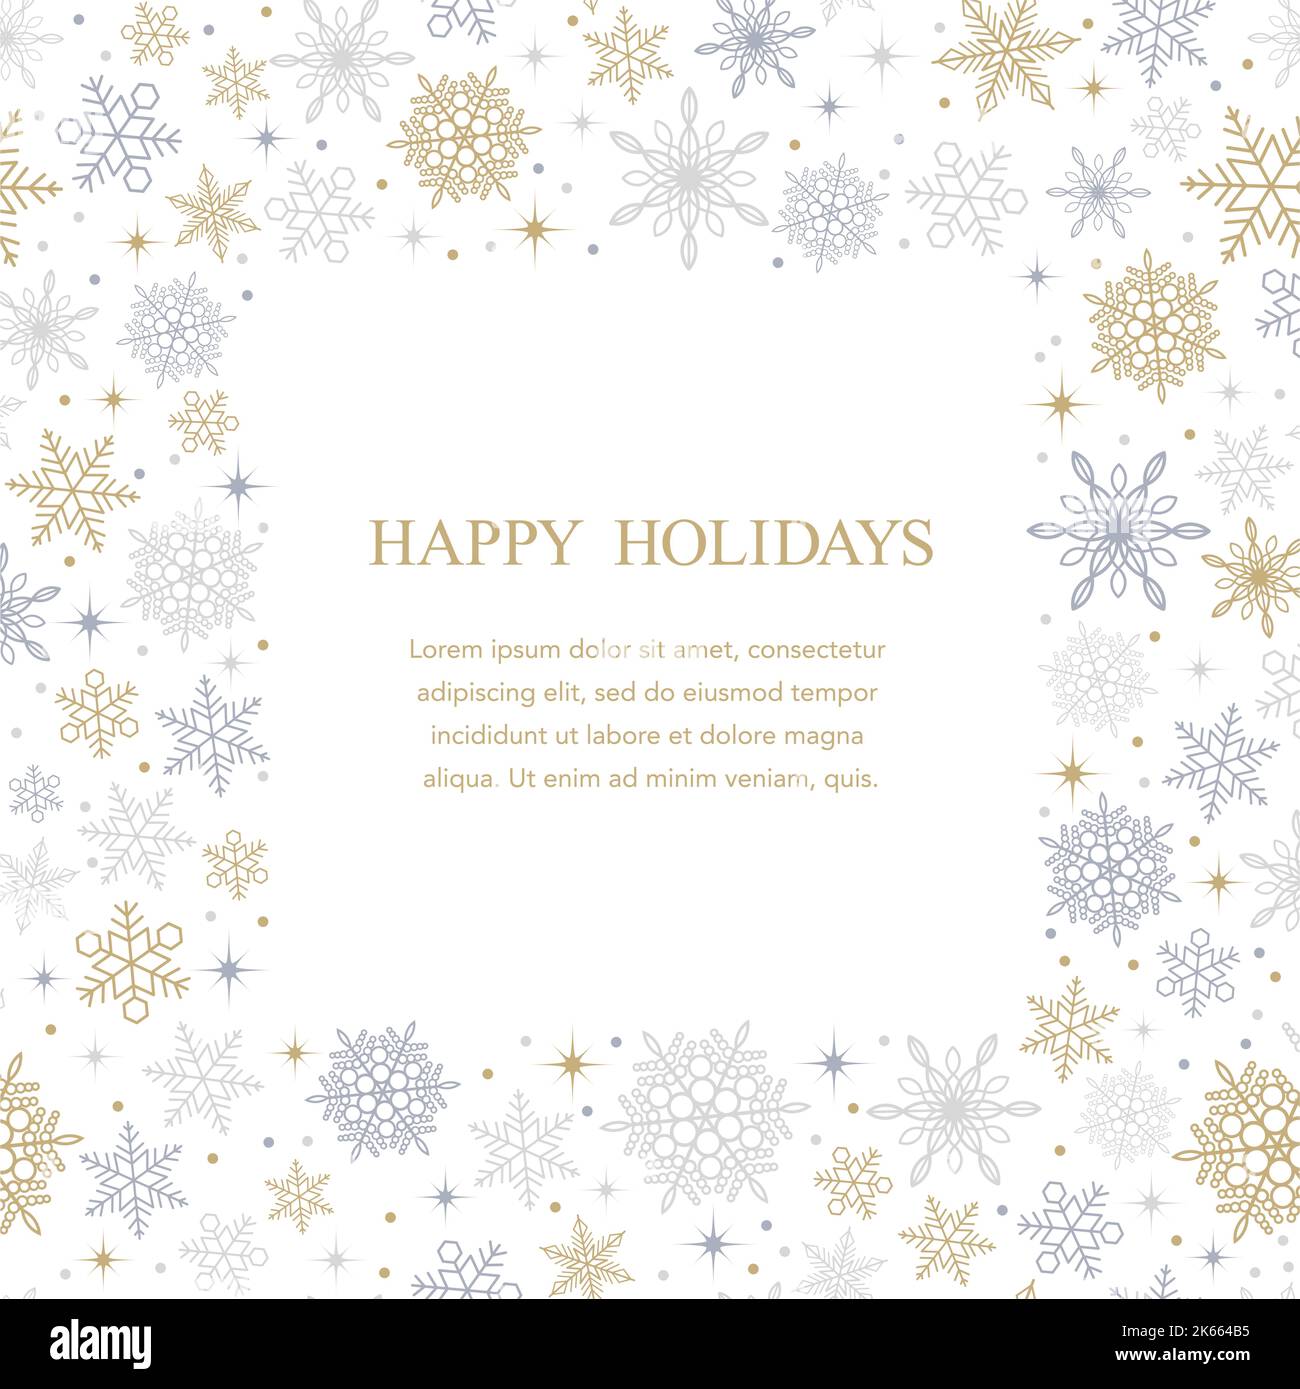 Happy Holidays Vector Square Frame Illustration con Abstract Snowflakes Pattern e Text Space. Illustrazione Vettoriale